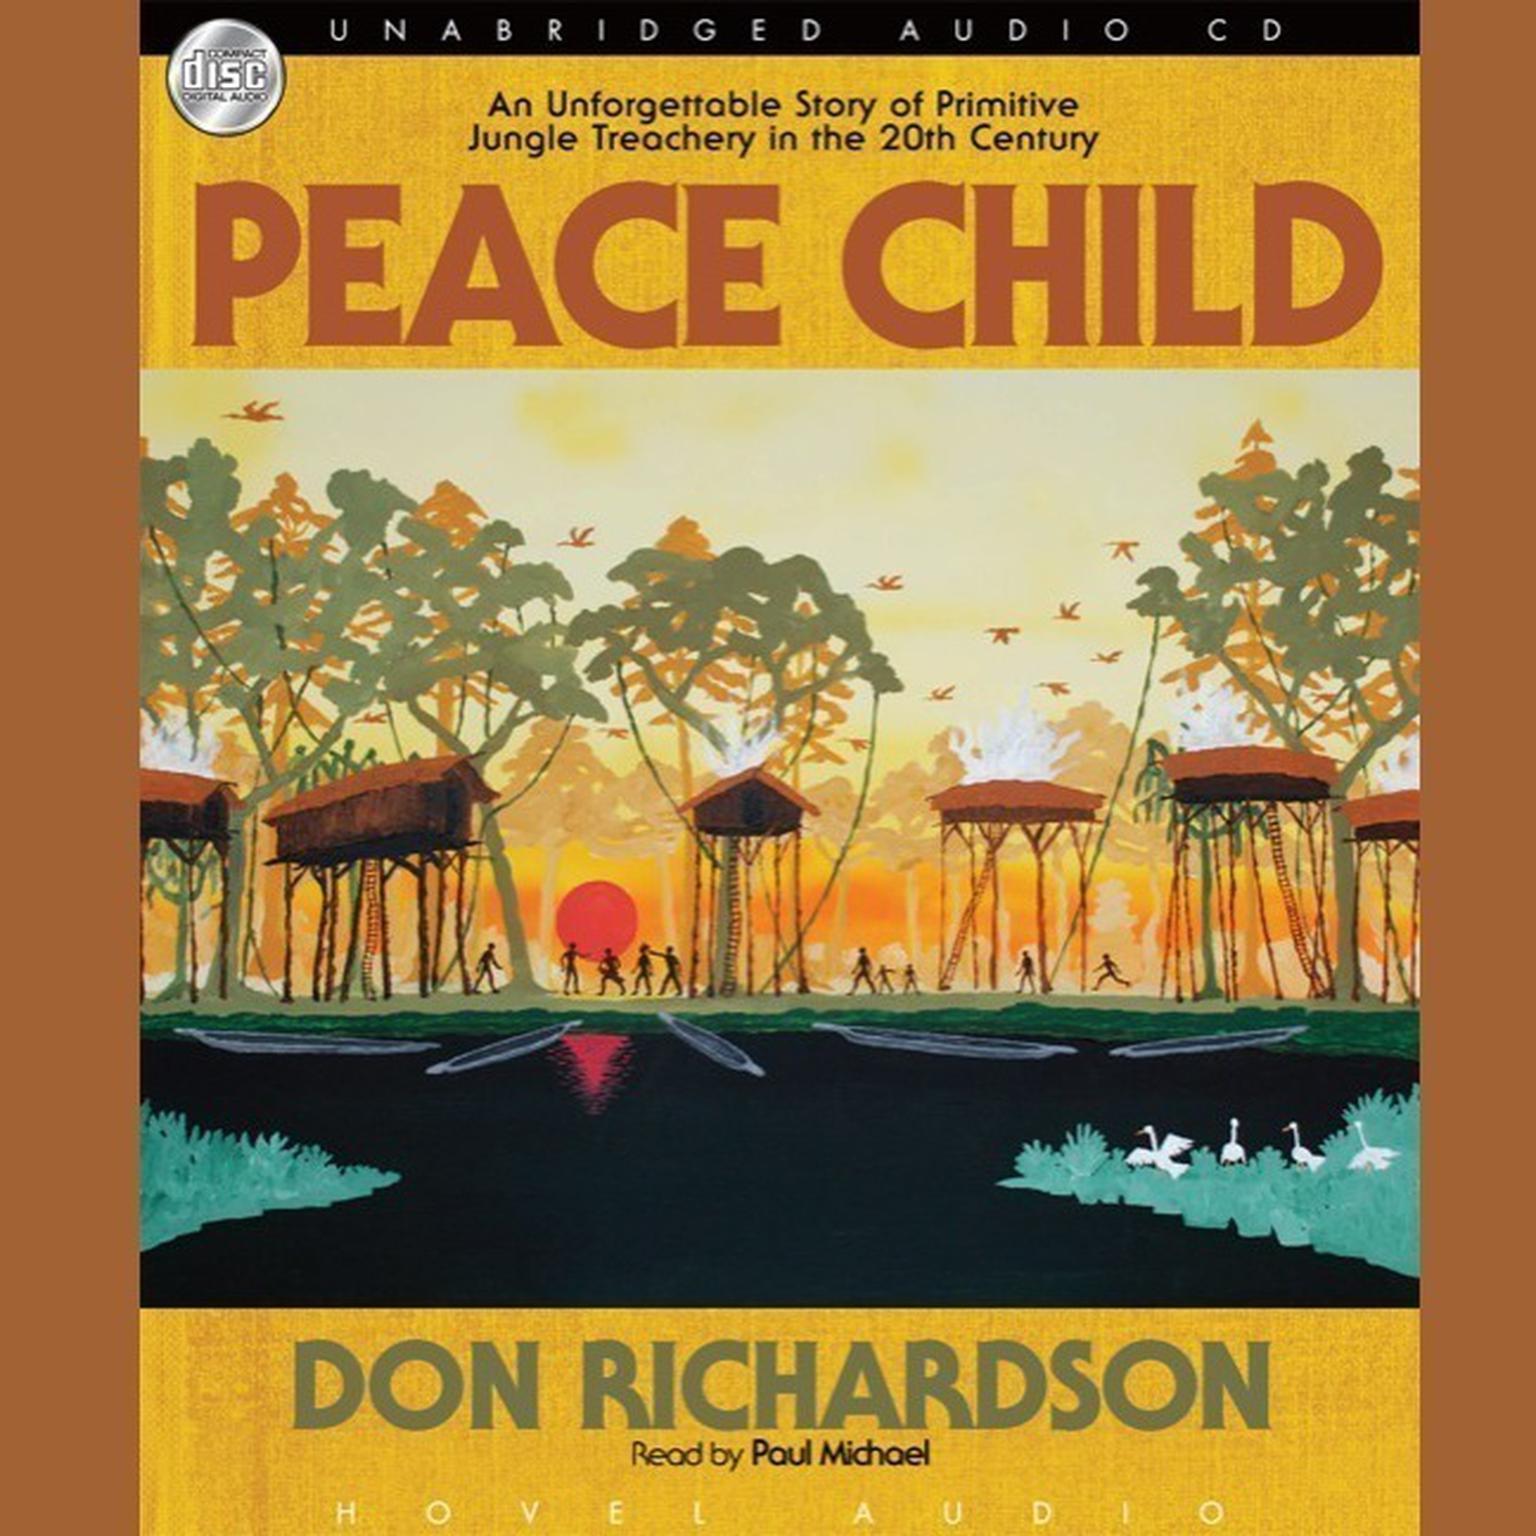 Peace Child: An Unforgettable Story of Primitive Jungle Treachery in the 20th Century Audiobook, by Don Richardson